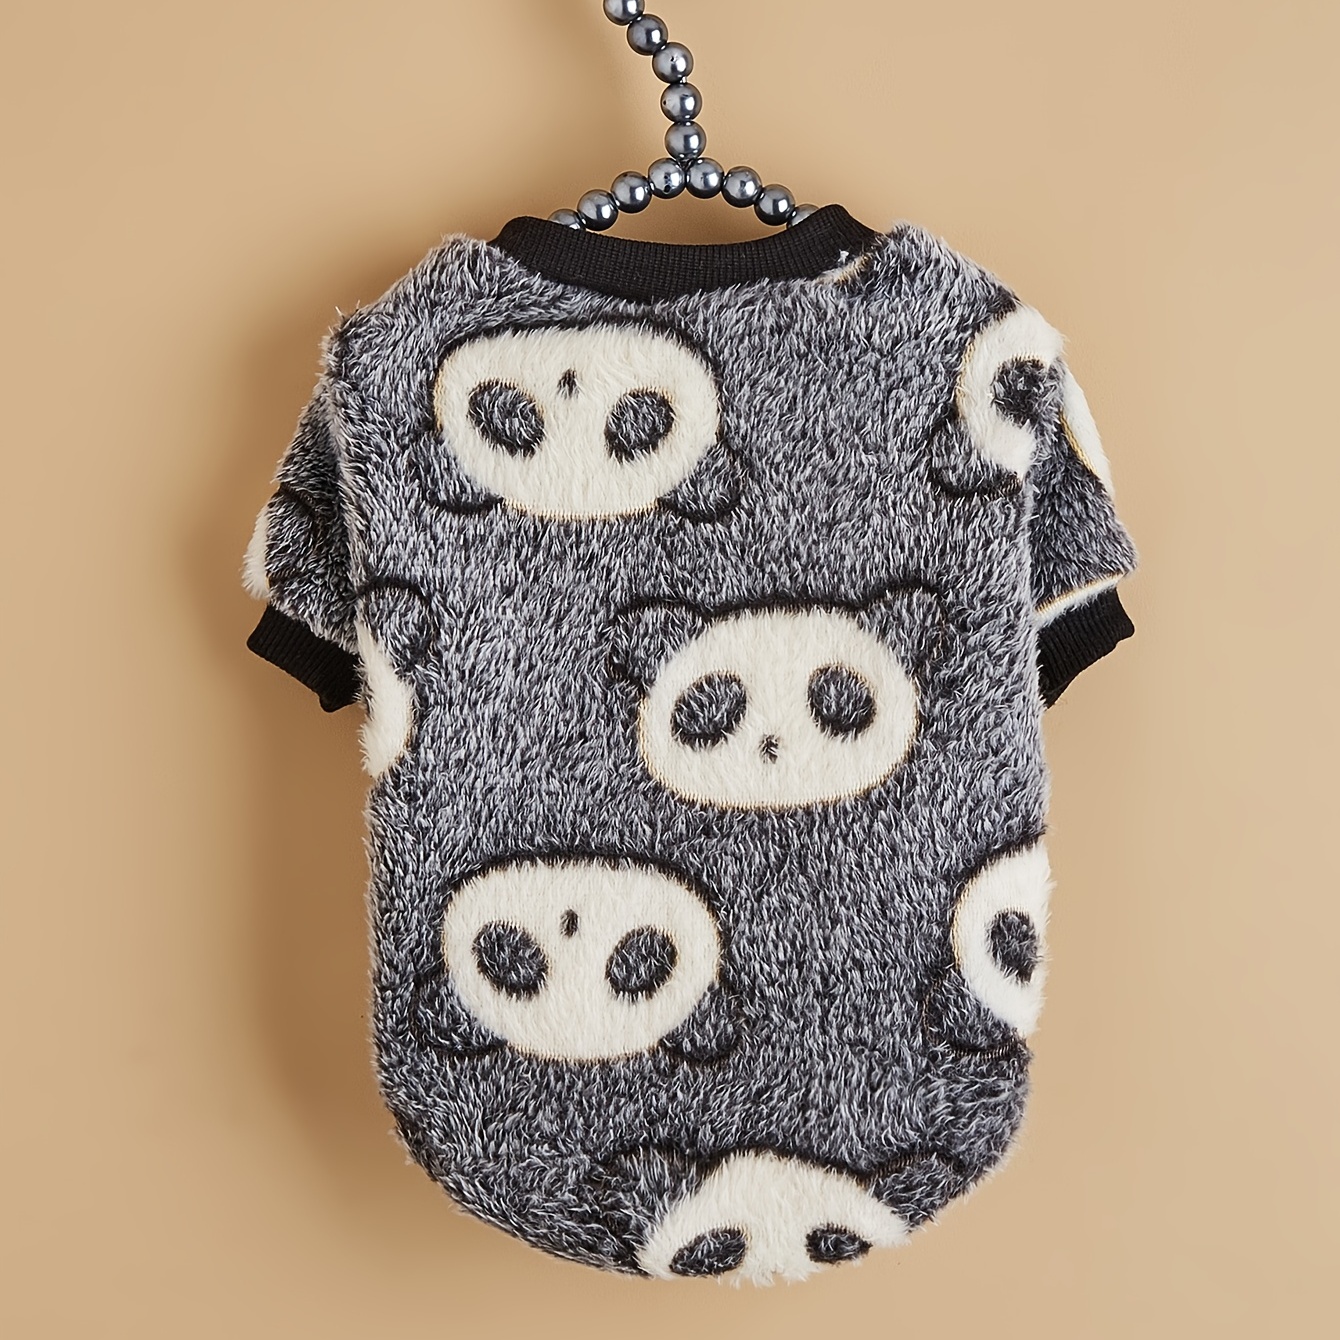 

1pc Black Panda Design Pet Sweatshirt Cute Dog Sweater For Cold Weather Puppy Warm Clothes